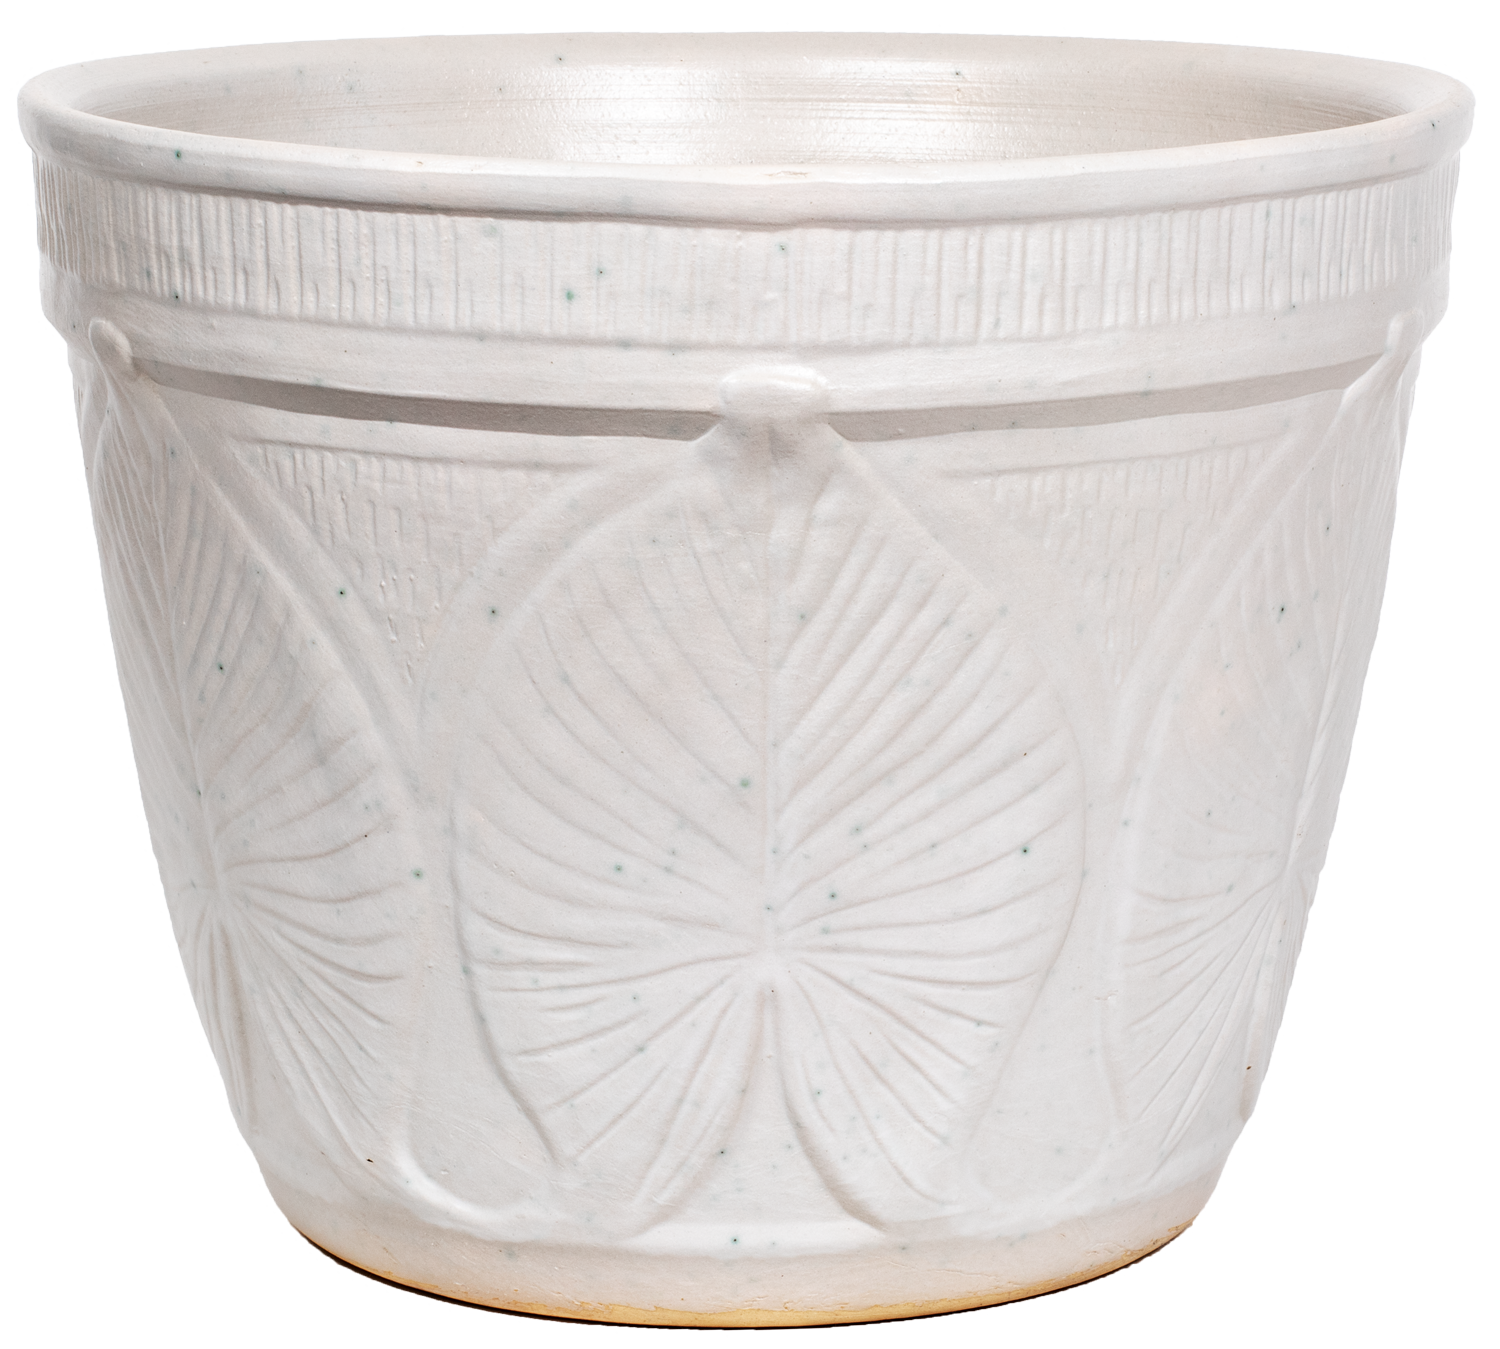 Large outdoor patio planter in white glaze with leaf design